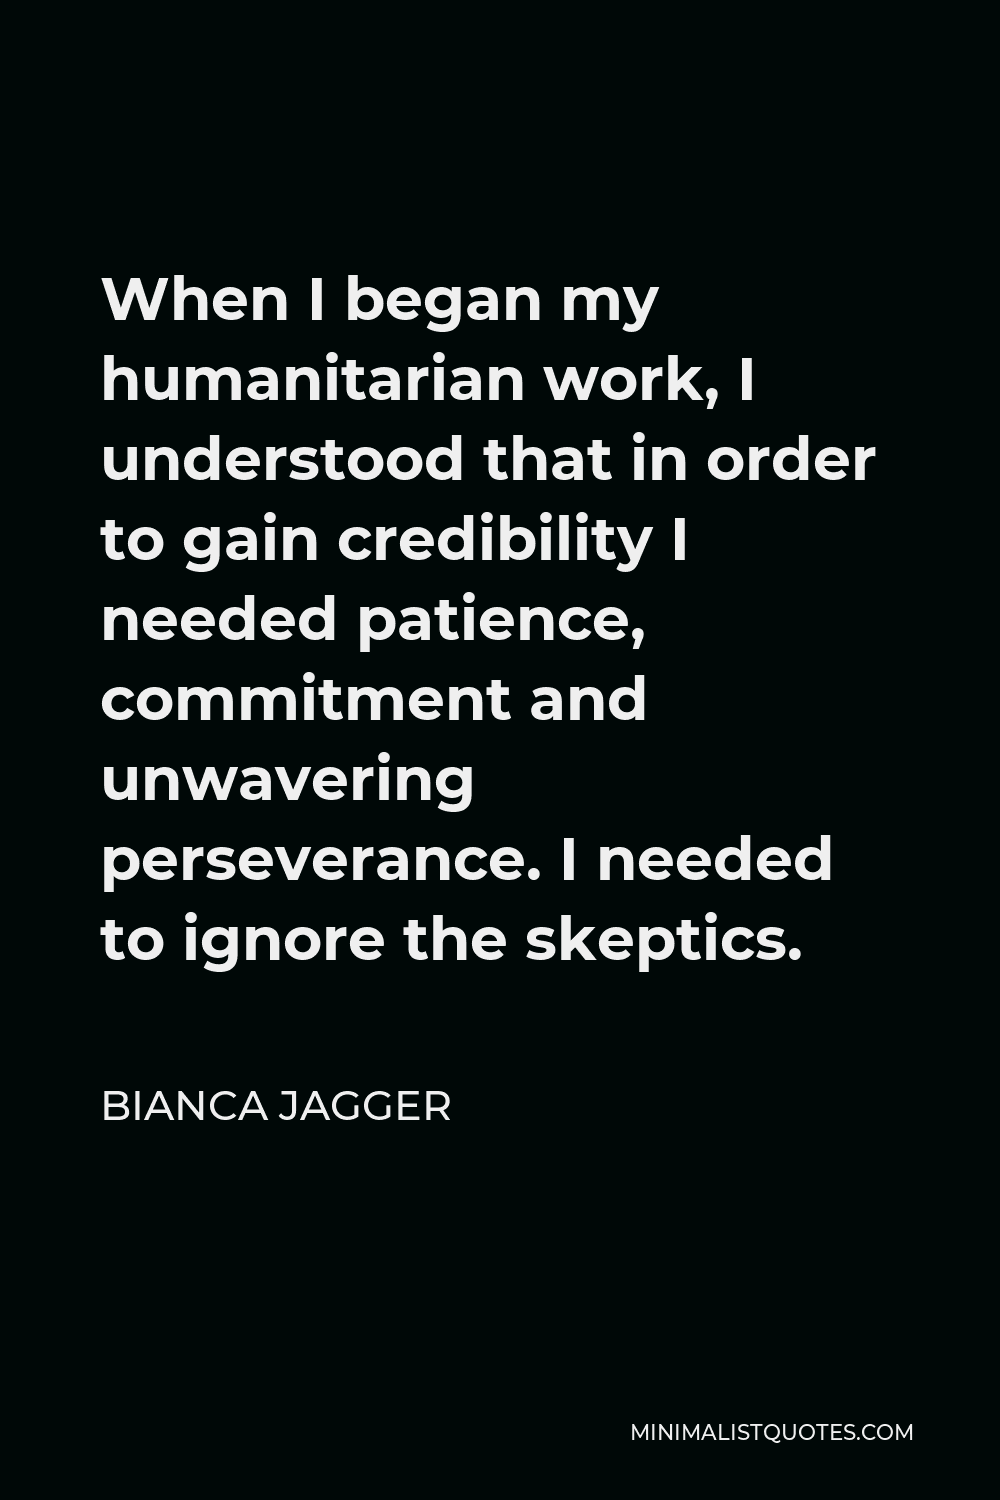 Bianca Jagger Quote - When I began my humanitarian work, I understood that in order to gain credibility I needed patience, commitment and unwavering perseverance. I needed to ignore the skeptics.